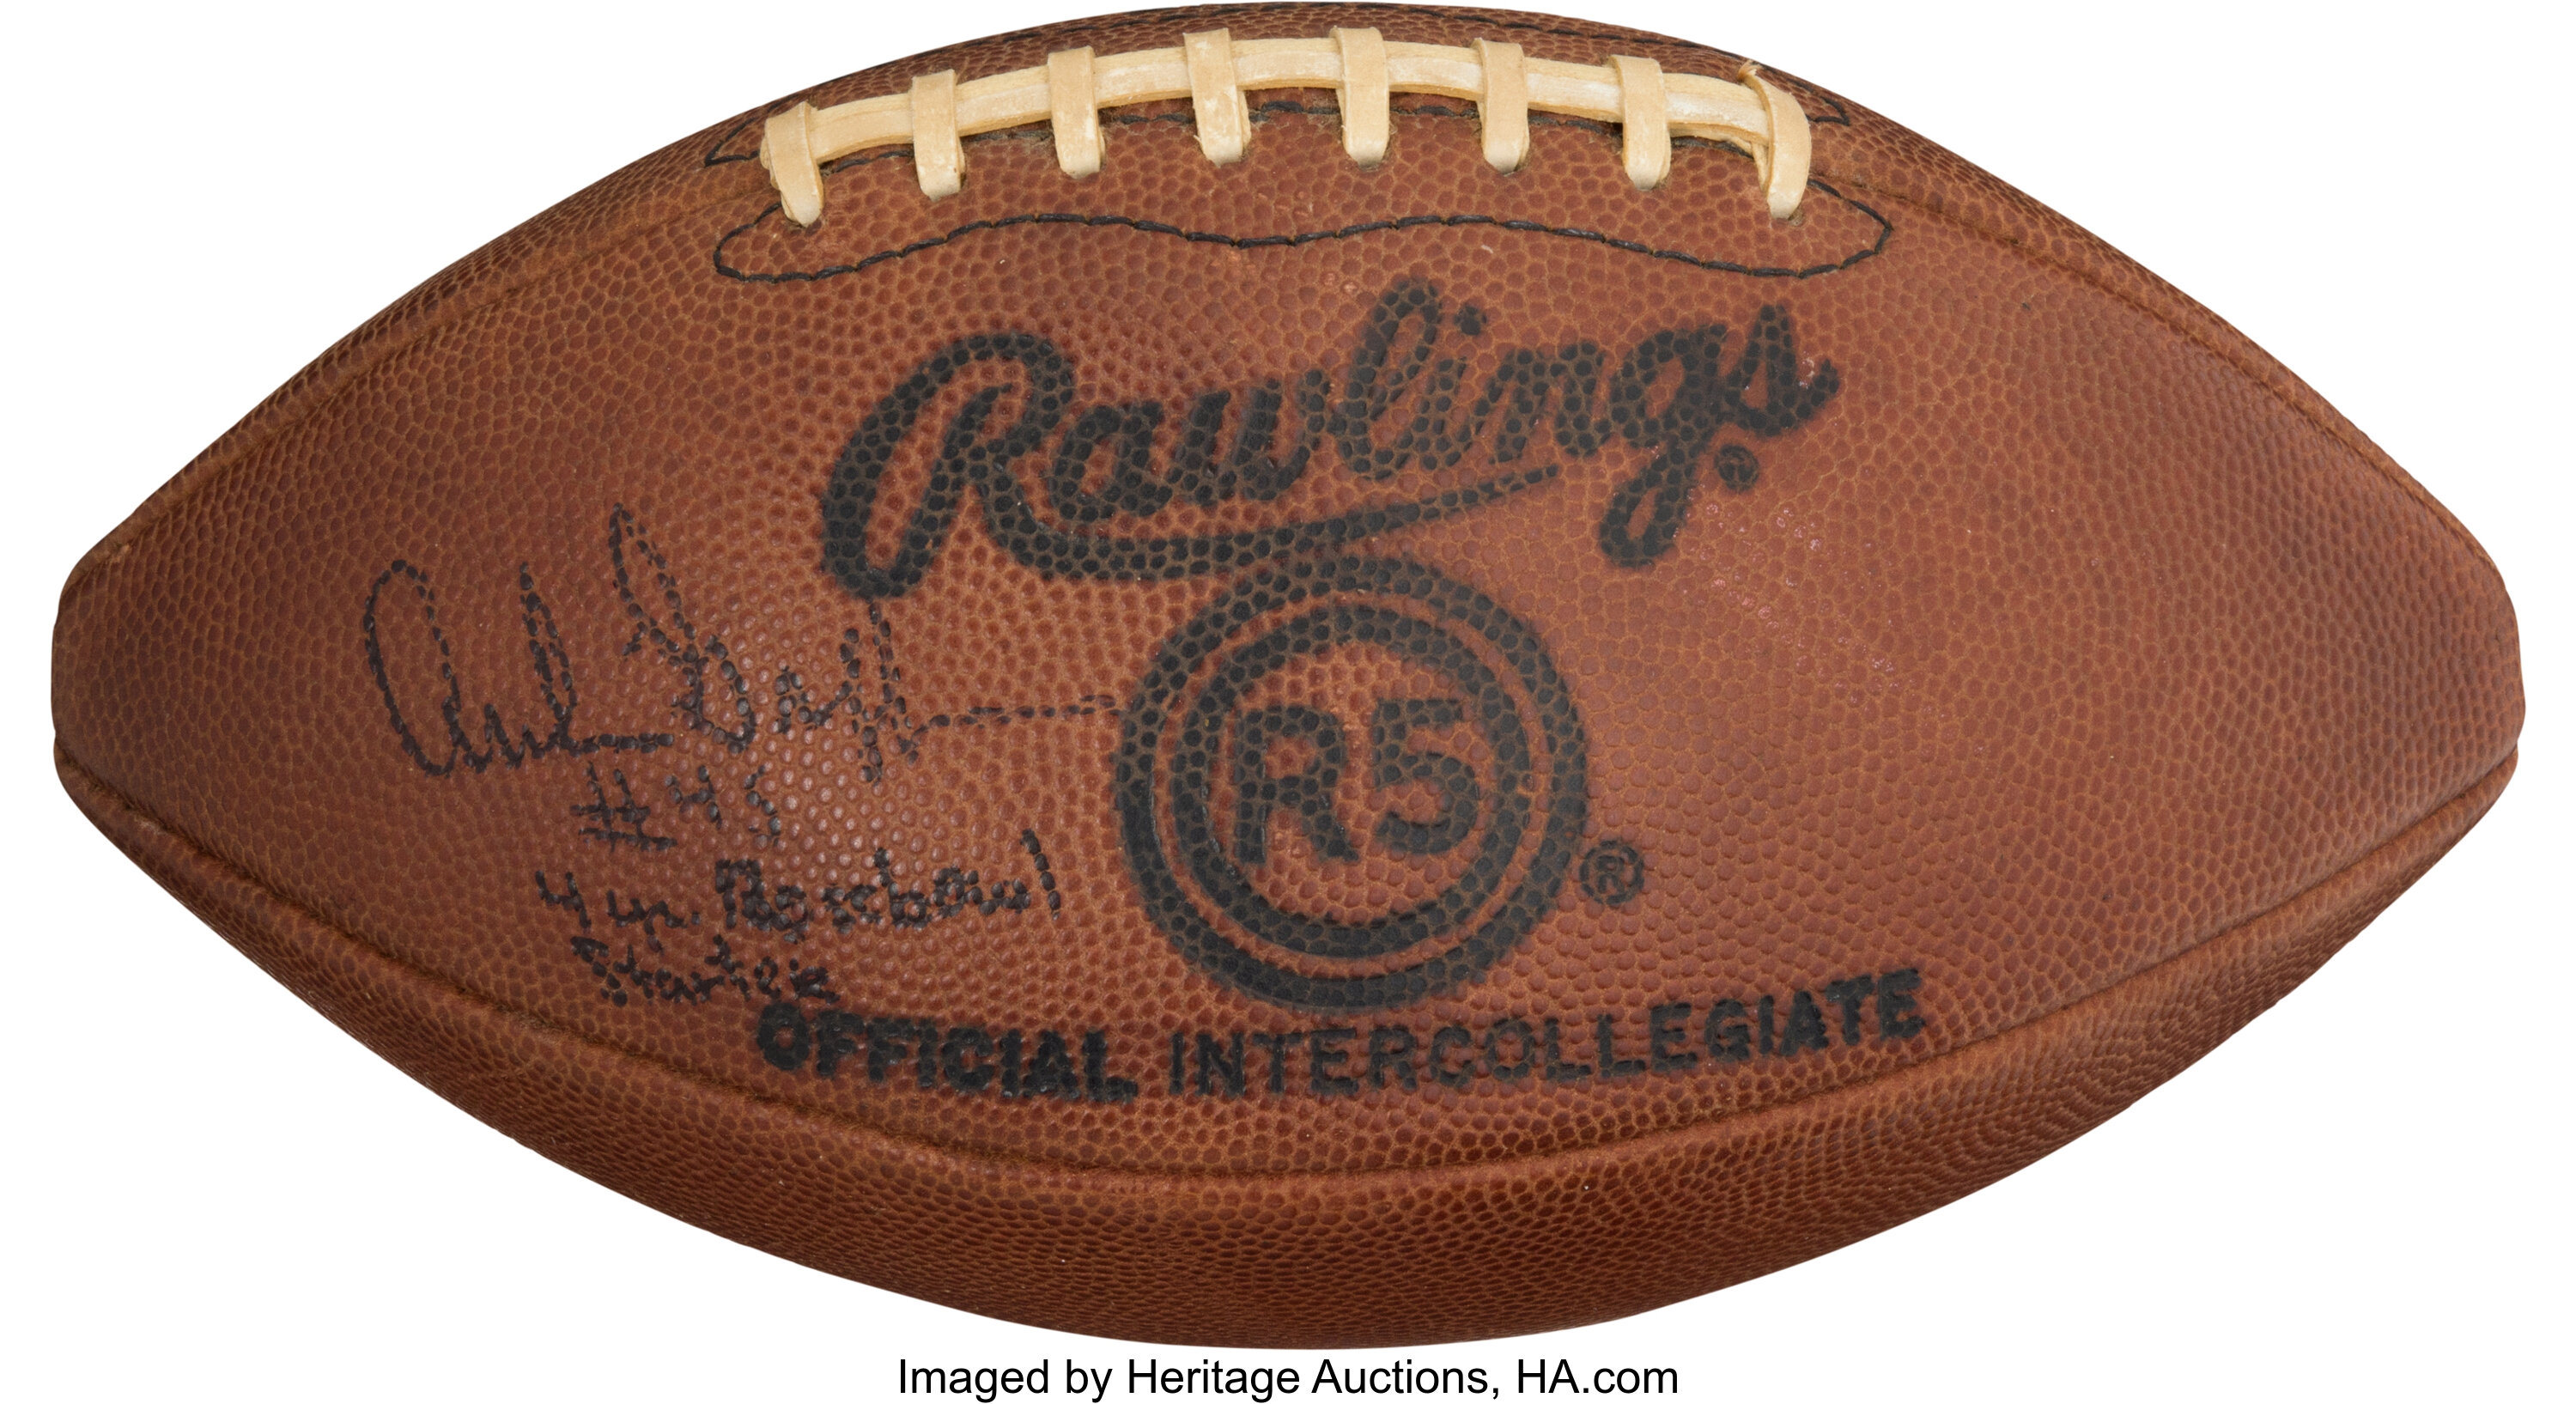 1973 Archie Griffin Signed Ohio State Rose Bowl Football., Lot #60046